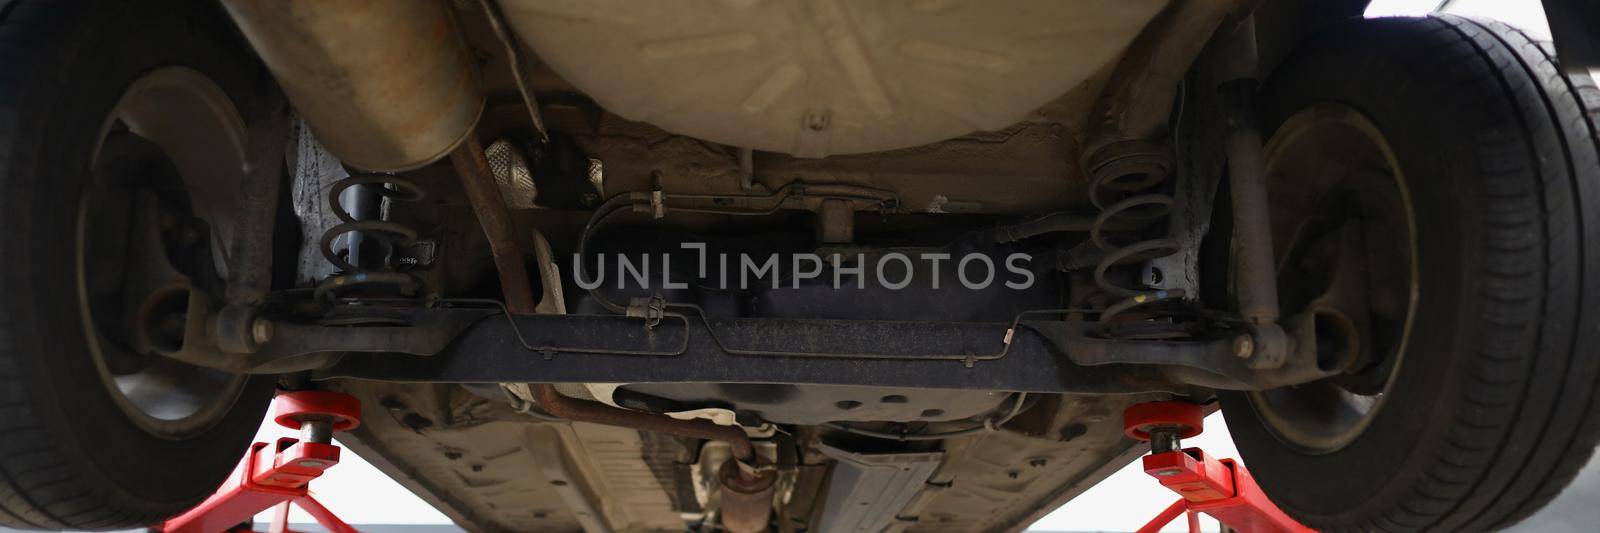 Car lifted in maintenance service to check condition, undercarriage of automobile by kuprevich